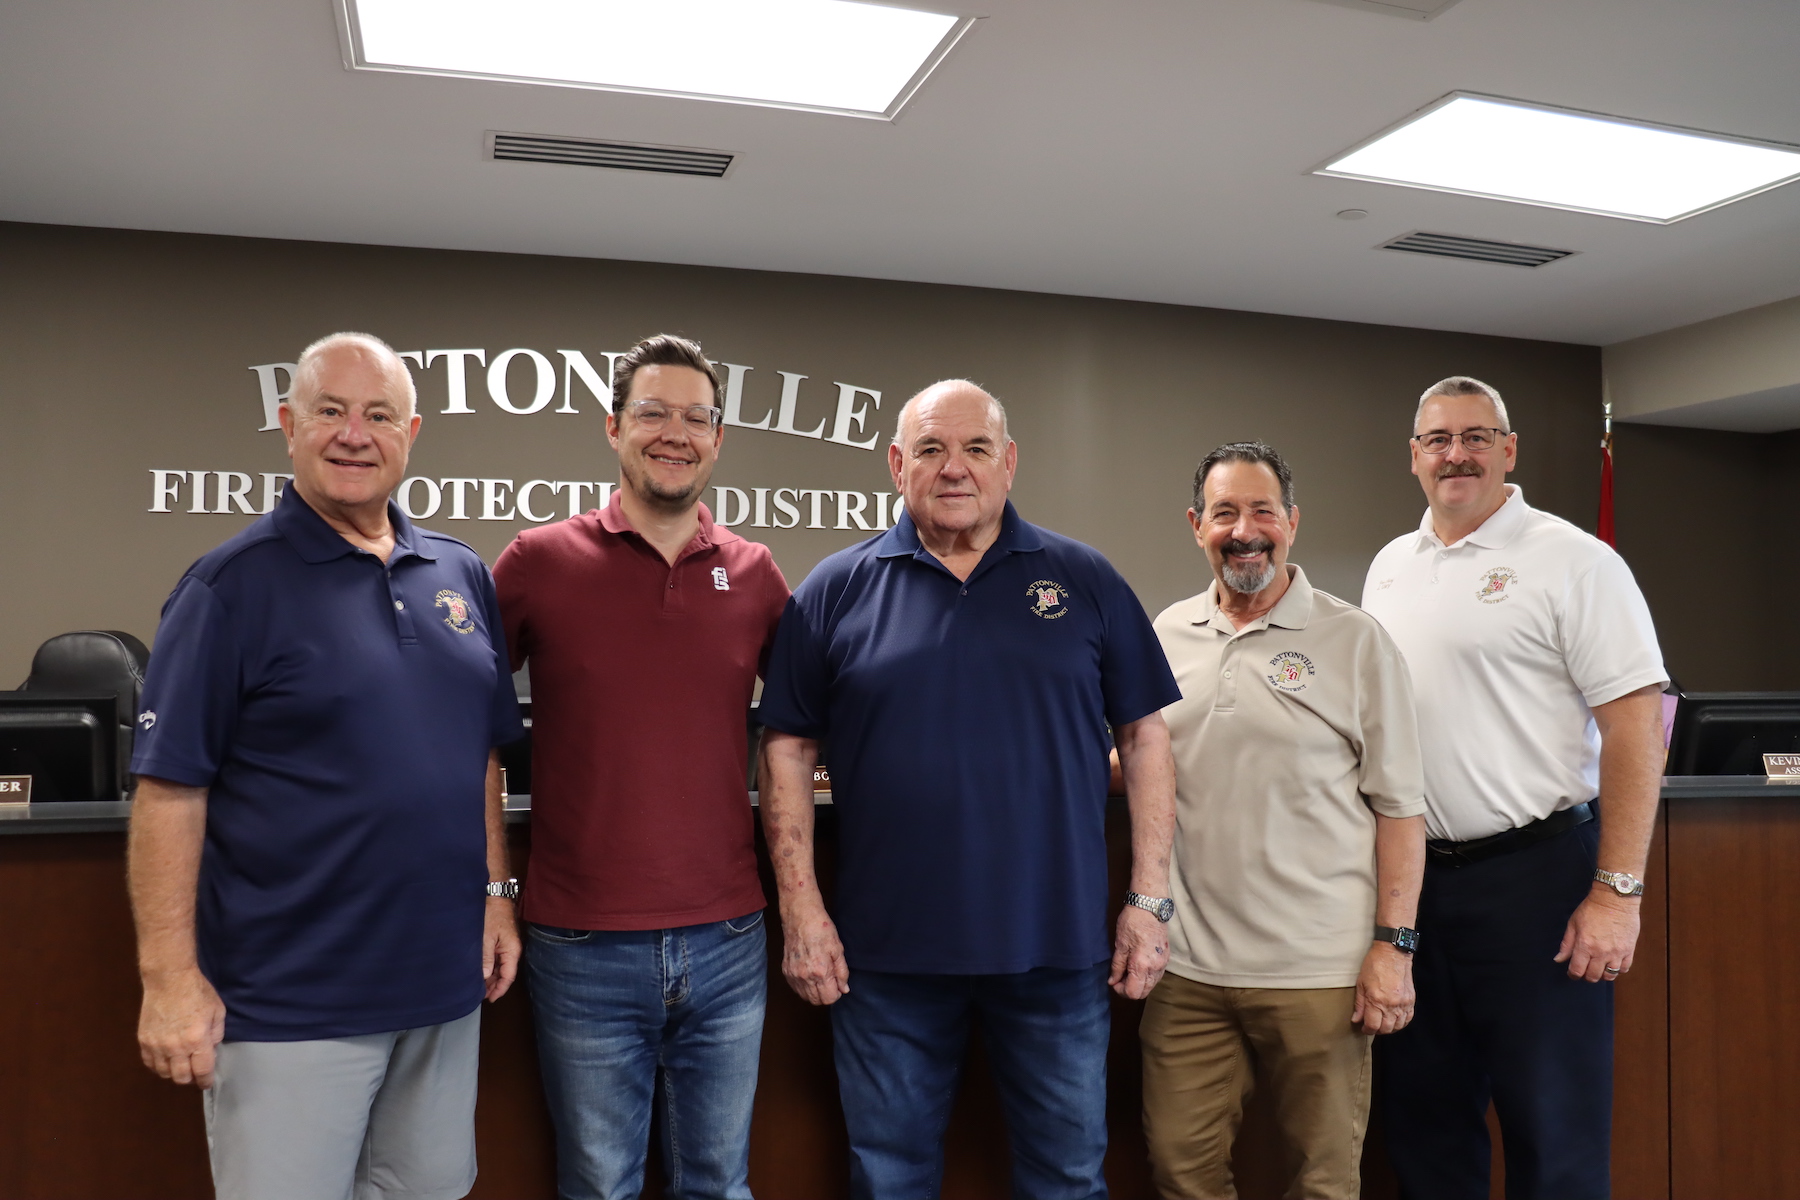 Jim Usry, Fire Chief of Pattonville Fire Department, along with other Board members of the Fire Protection District, along with Josh Read, Marketing Director for FSI